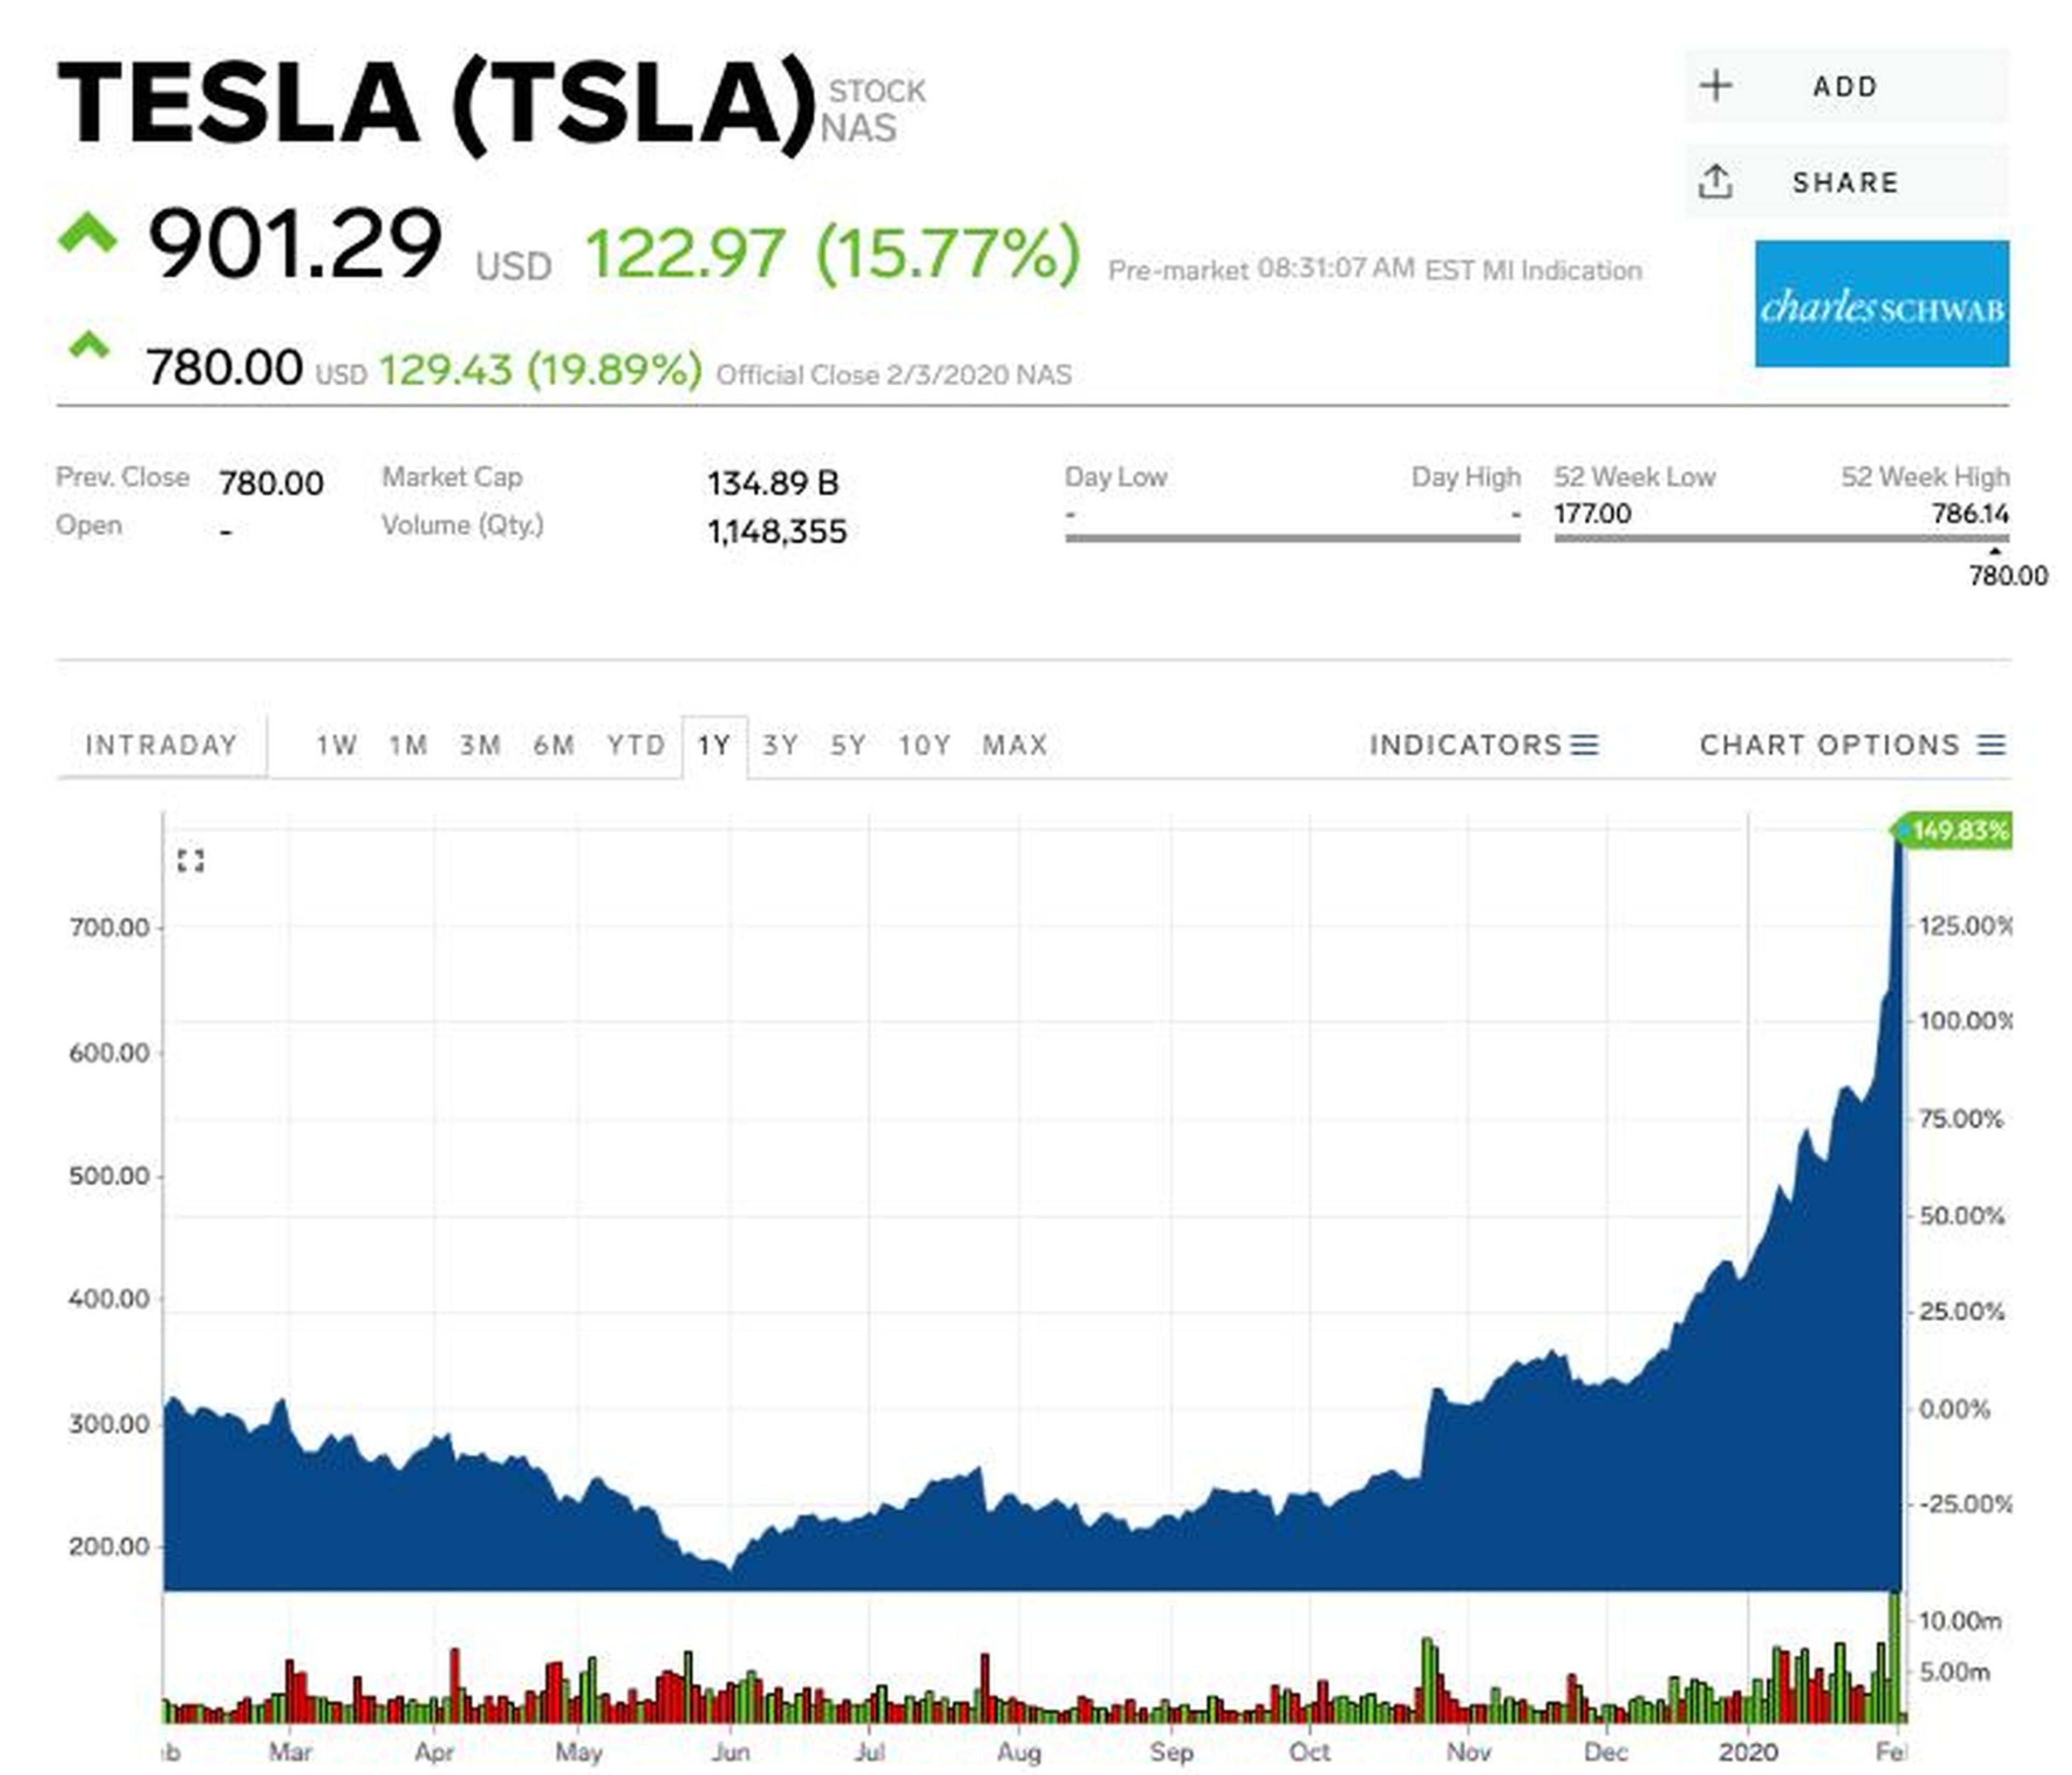 Tesla soars another 16% a day after recording its biggest spike since 2013